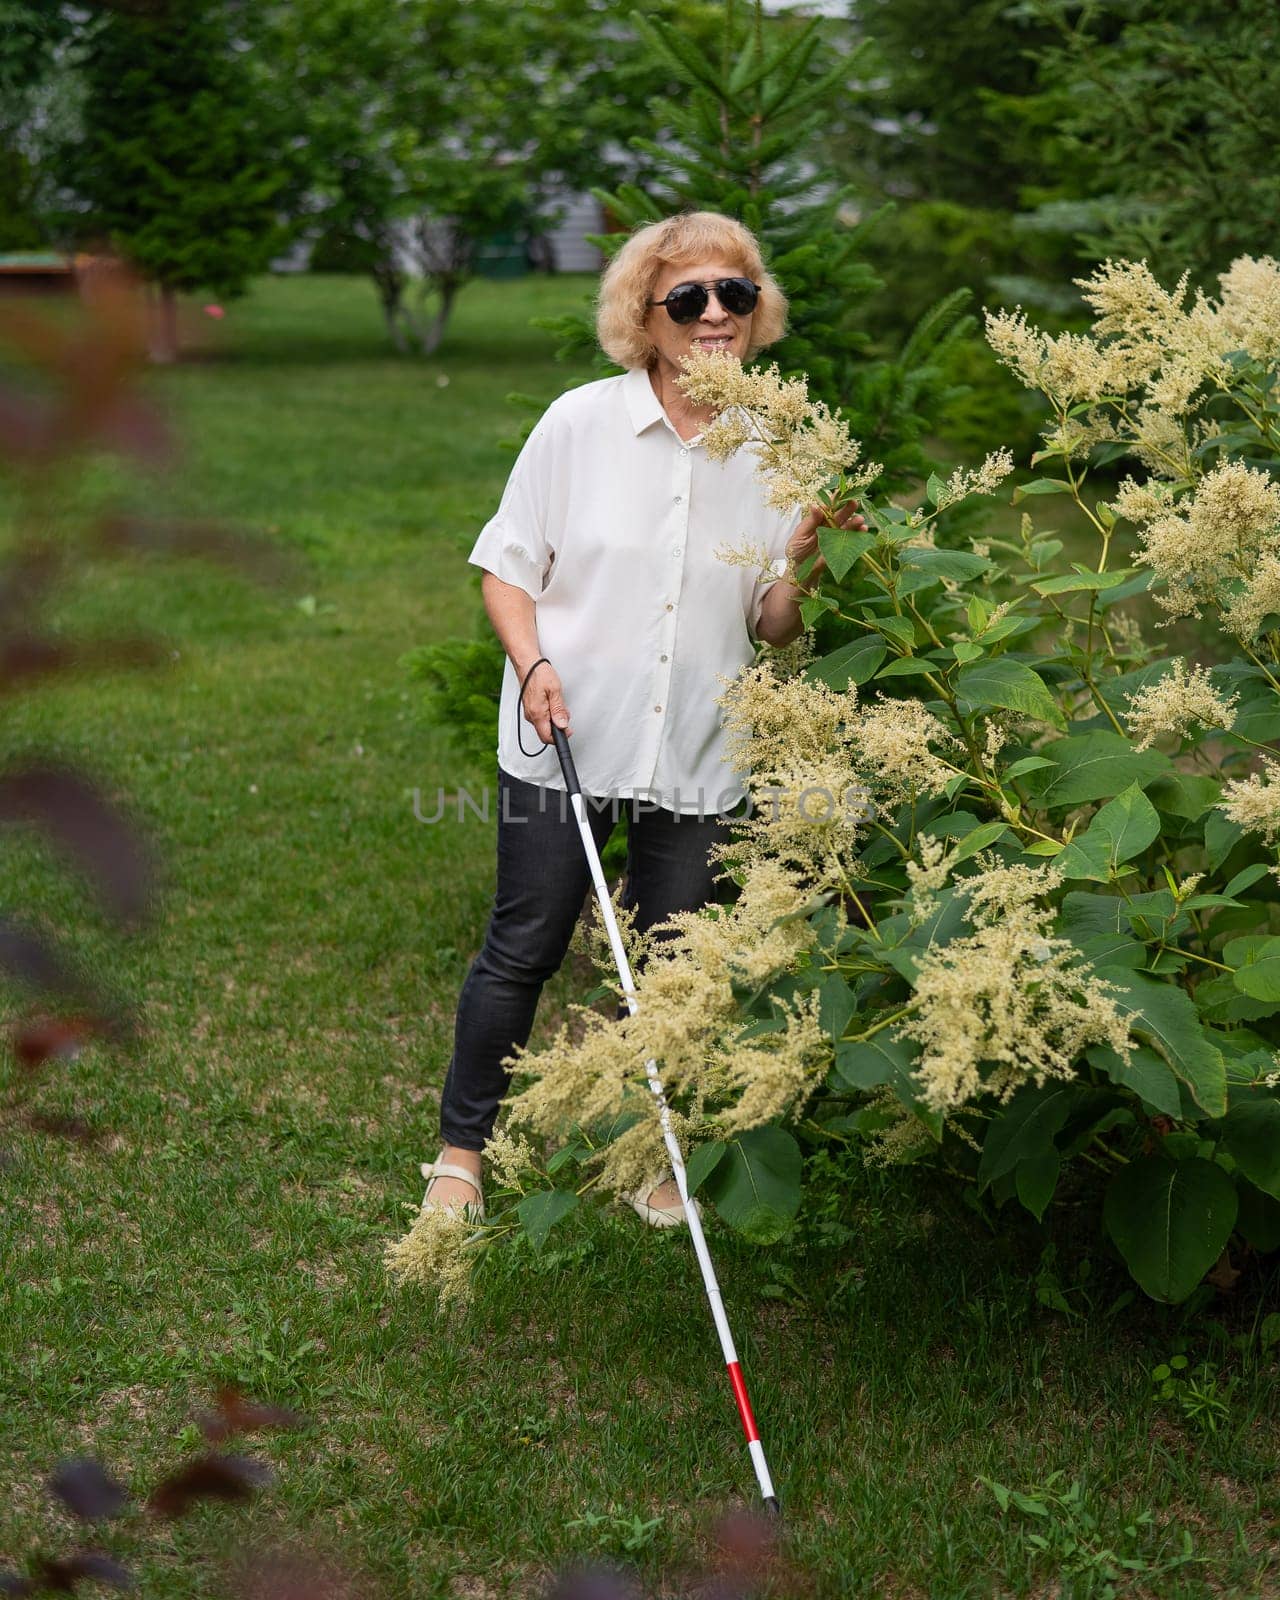 An elderly blind woman smells a flowering shrub while walking in the park